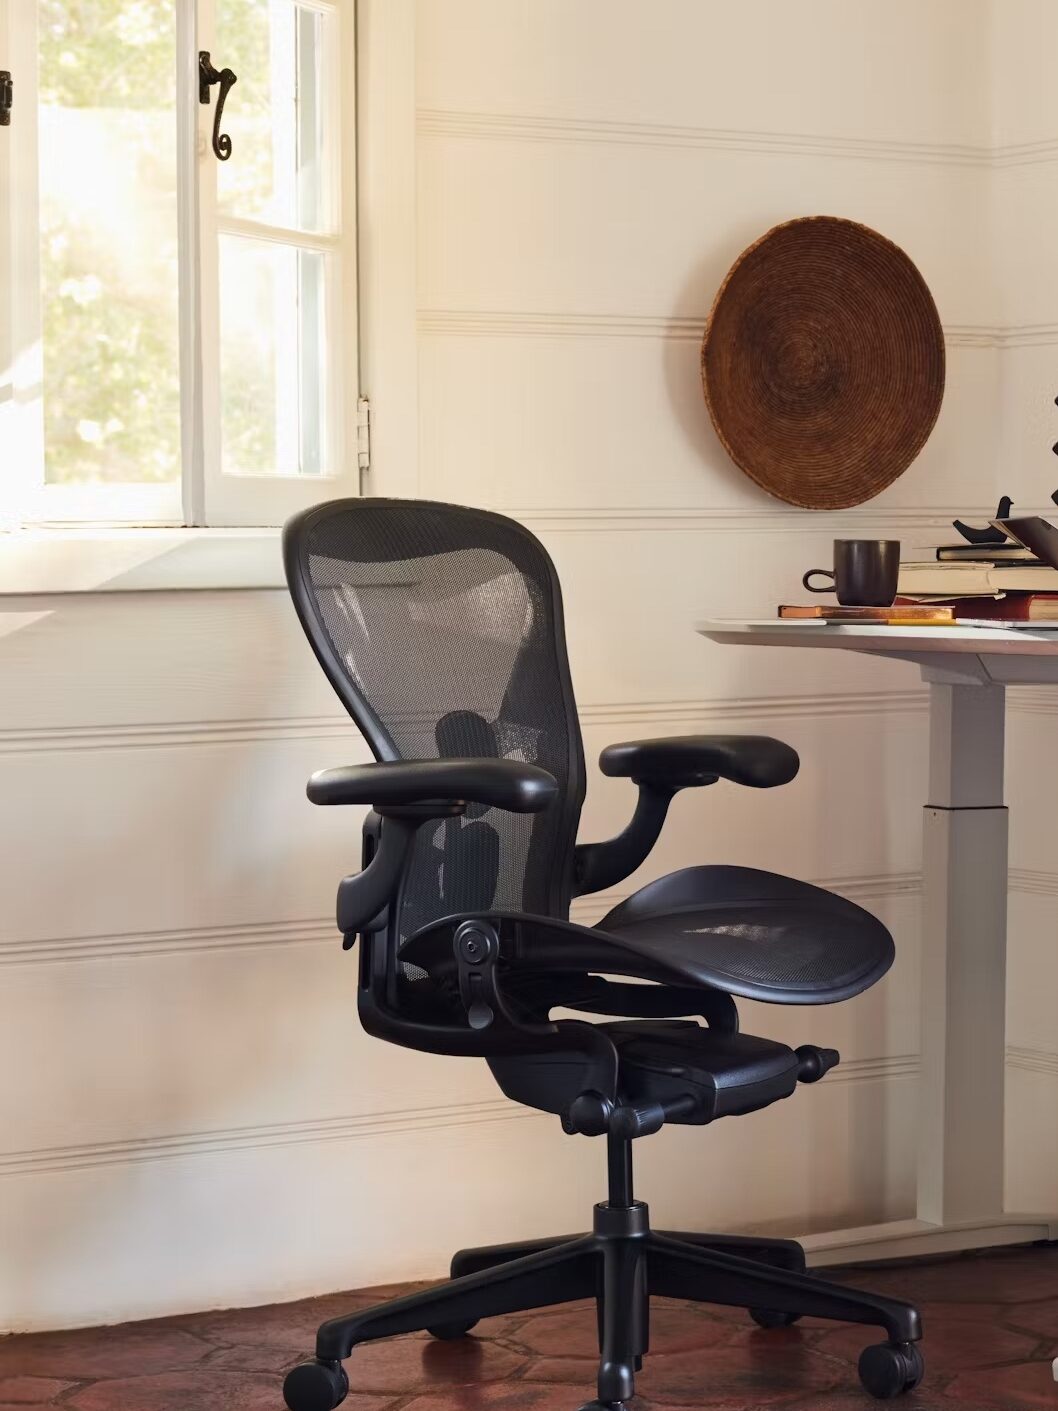 An ergonomic office chair with adjustable armrests in a bright room with a wooden desk and terracotta floor.